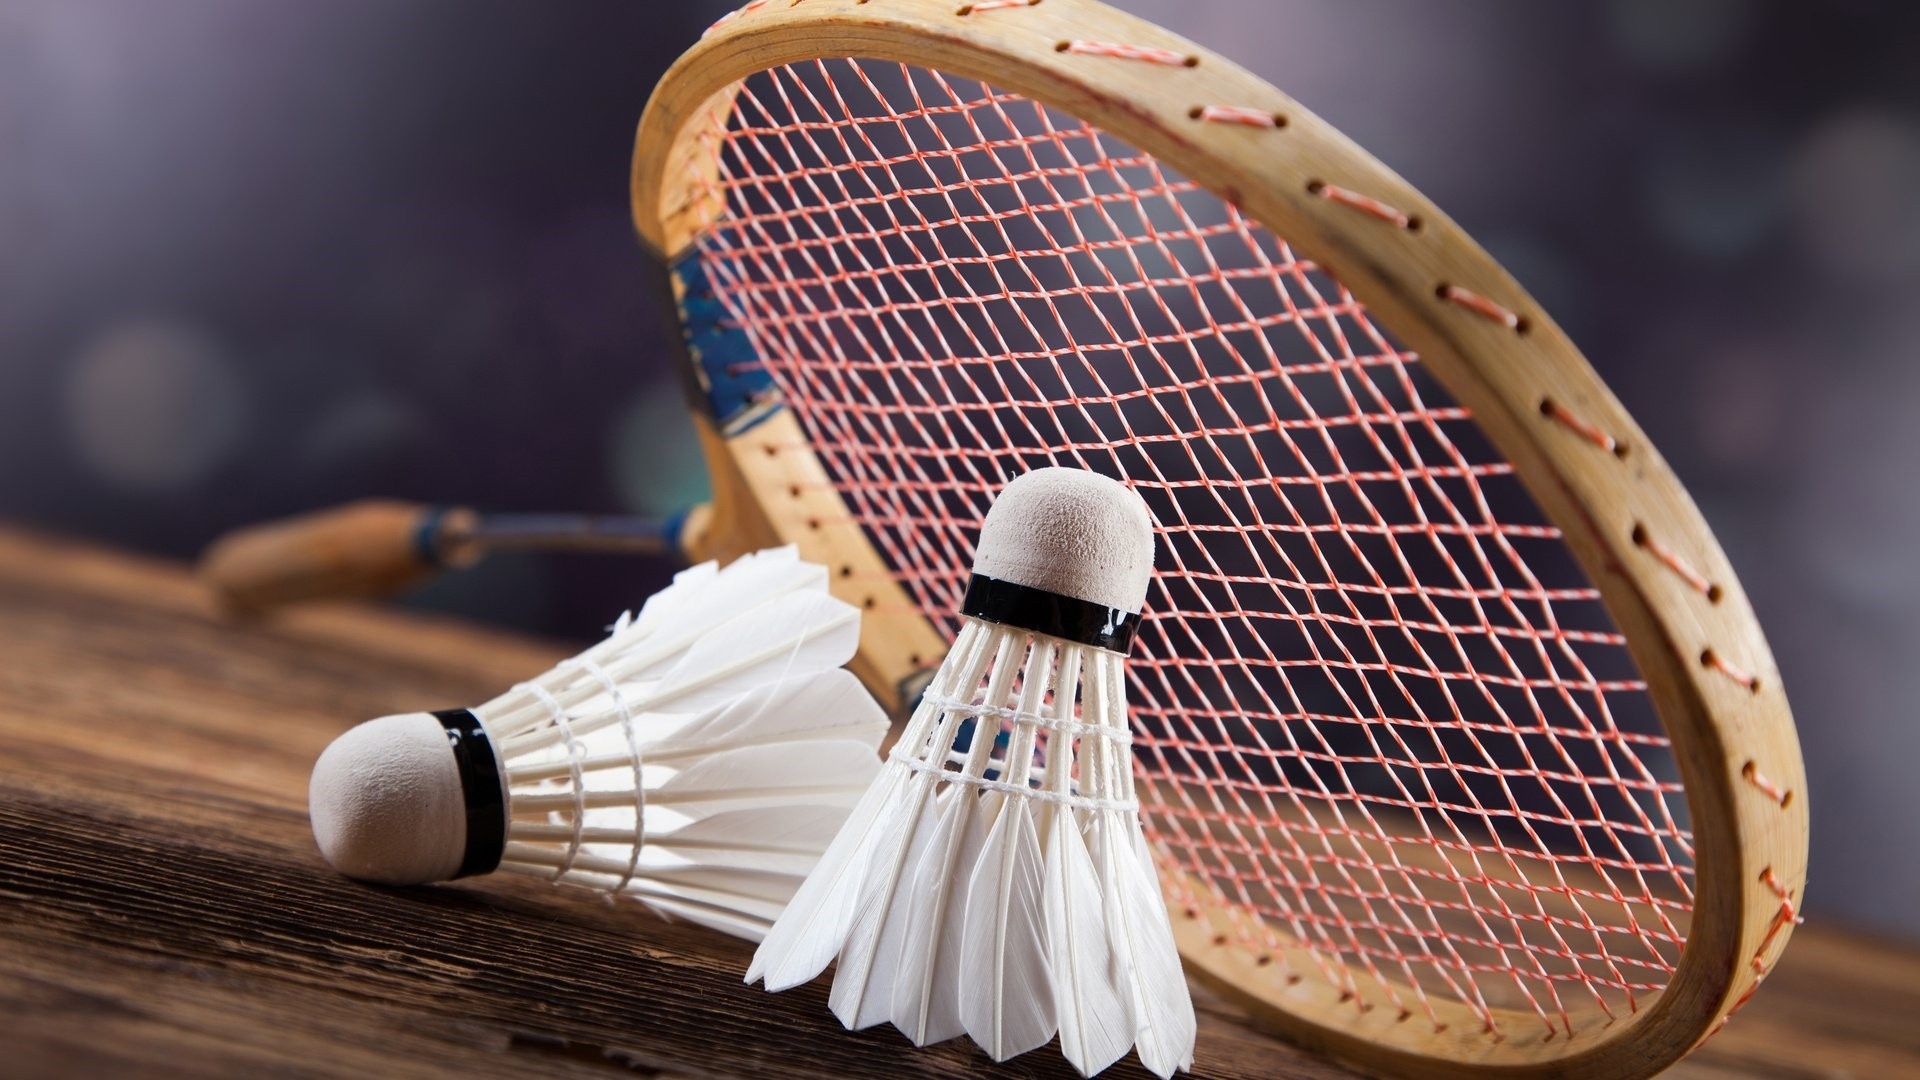 Sporting badminton wallpapers, Exciting matches, Competitive energy, Sports visuals, 1920x1080 Full HD Desktop